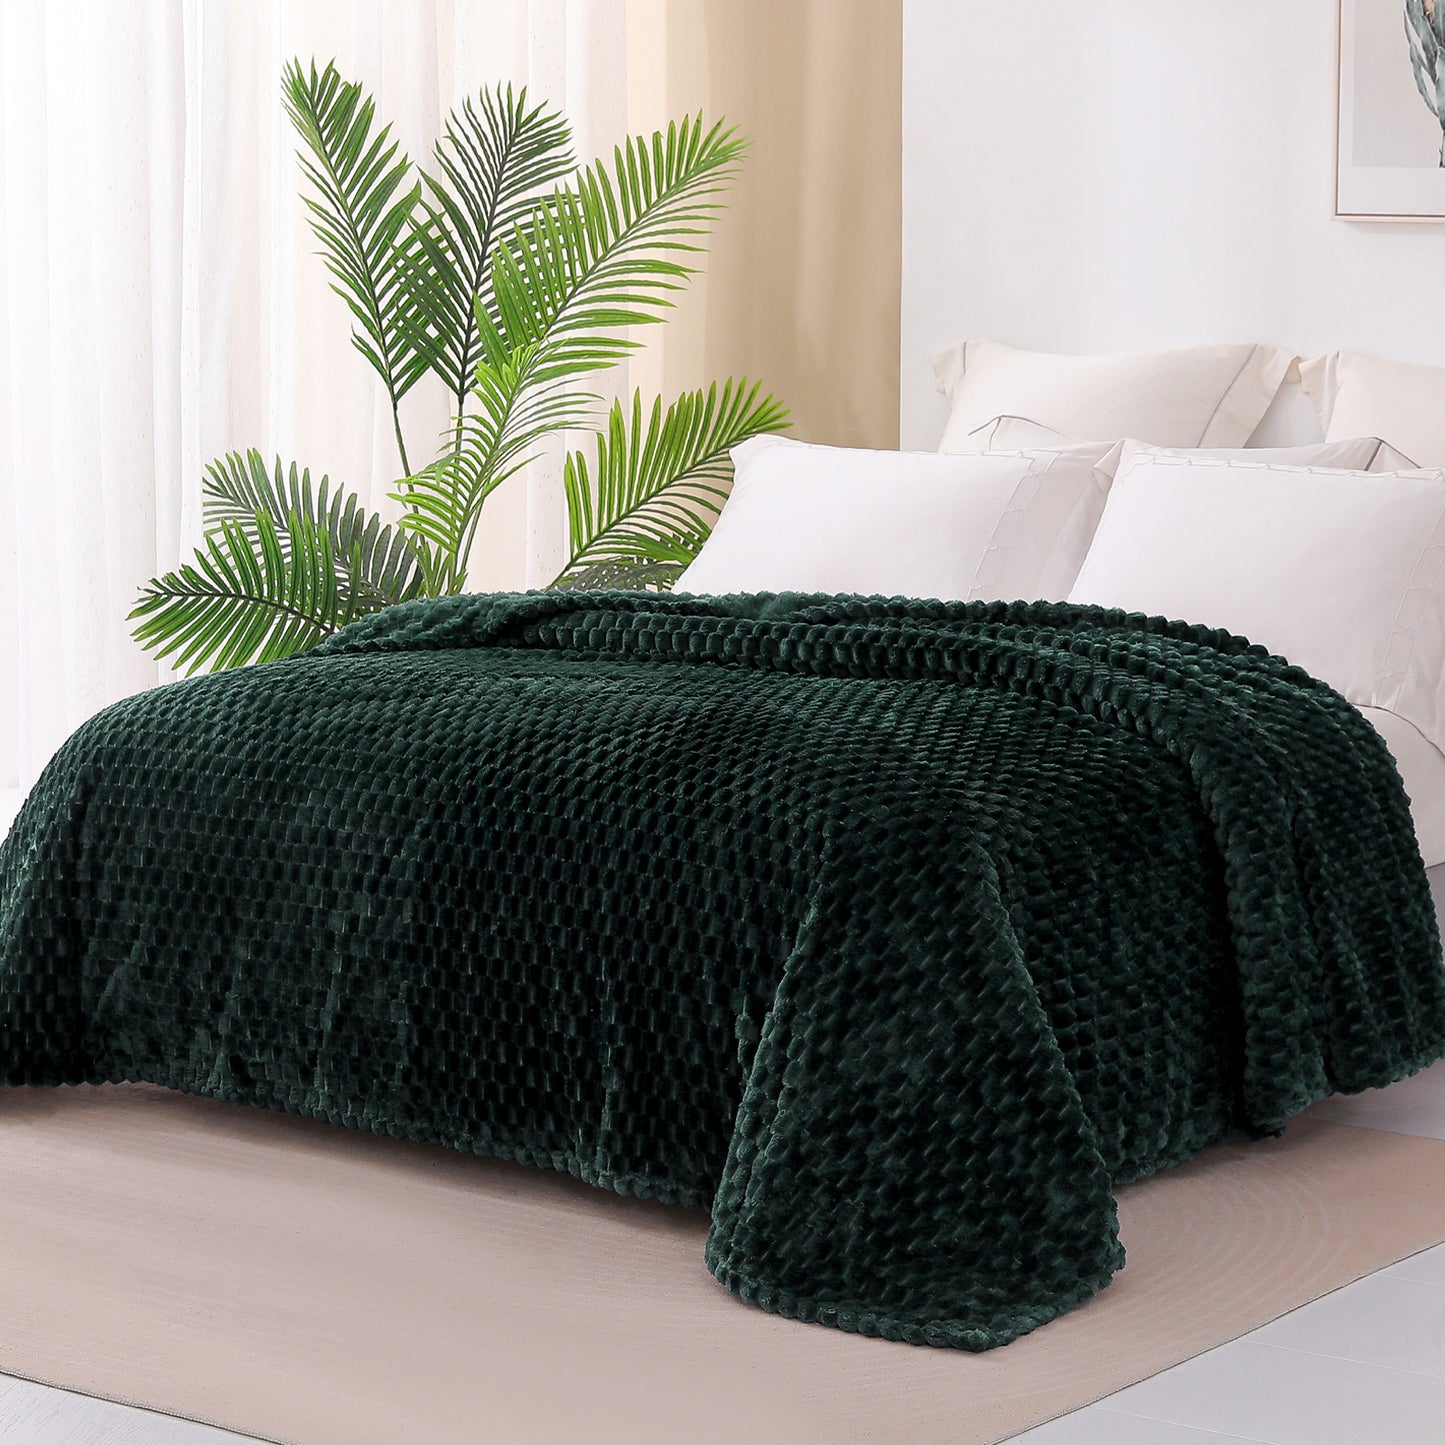 Exclusivo Mezcla King Size Flannel Fleece Blanket, 90x104 Inches Stylish Jacquard Velvet Plush Blanket for Bed, Cozy, Warm, Lightweight and Decorative Forest Green Blanket